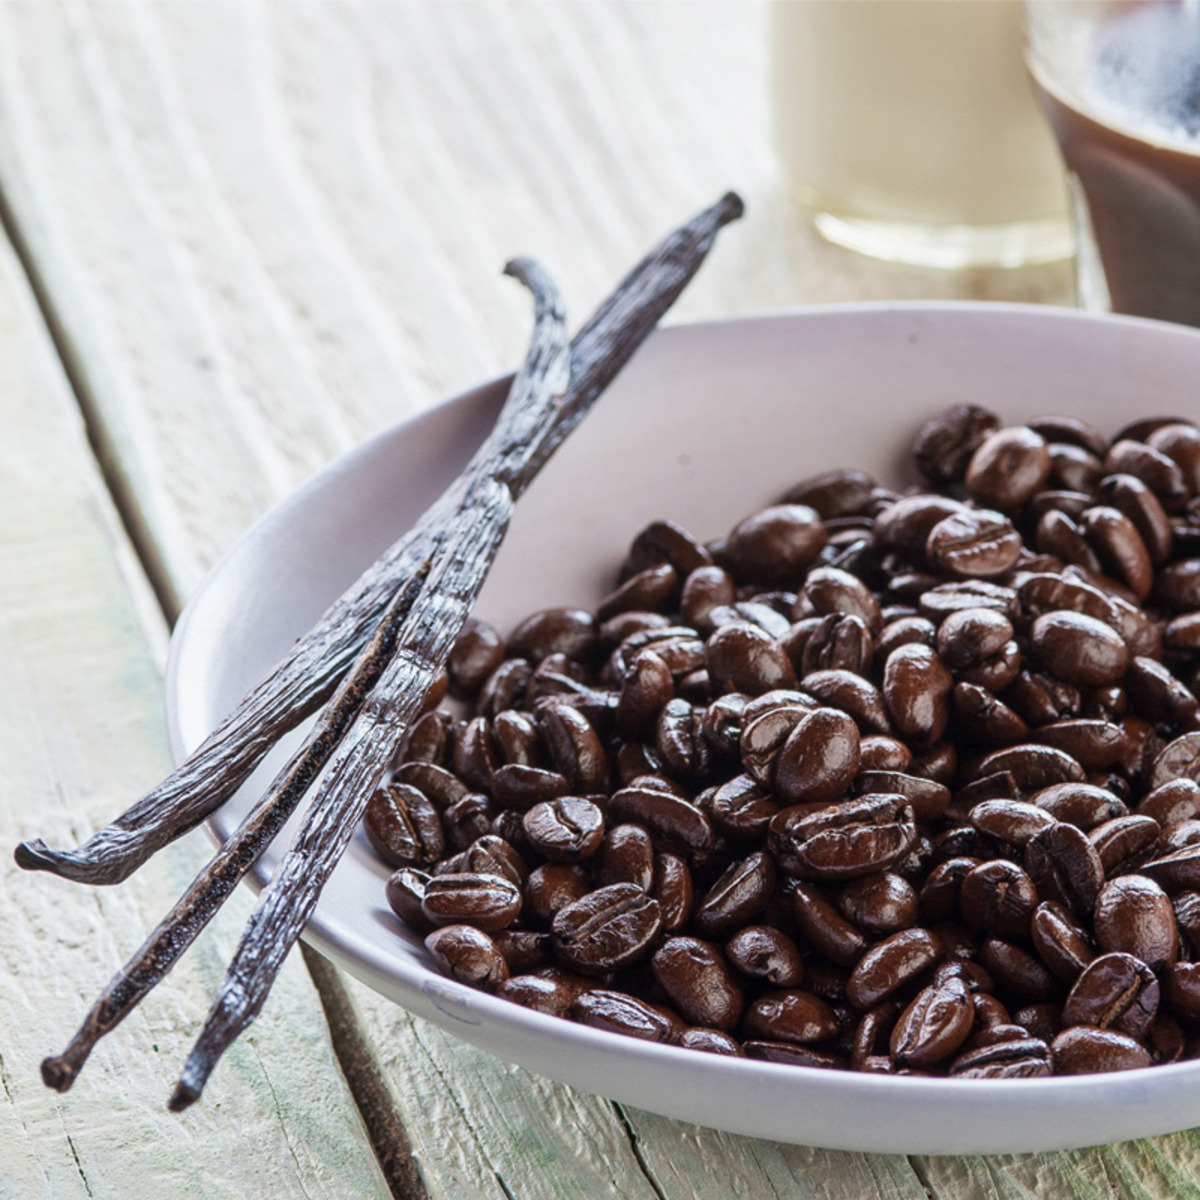 Vanilla & Coffee Beans together.